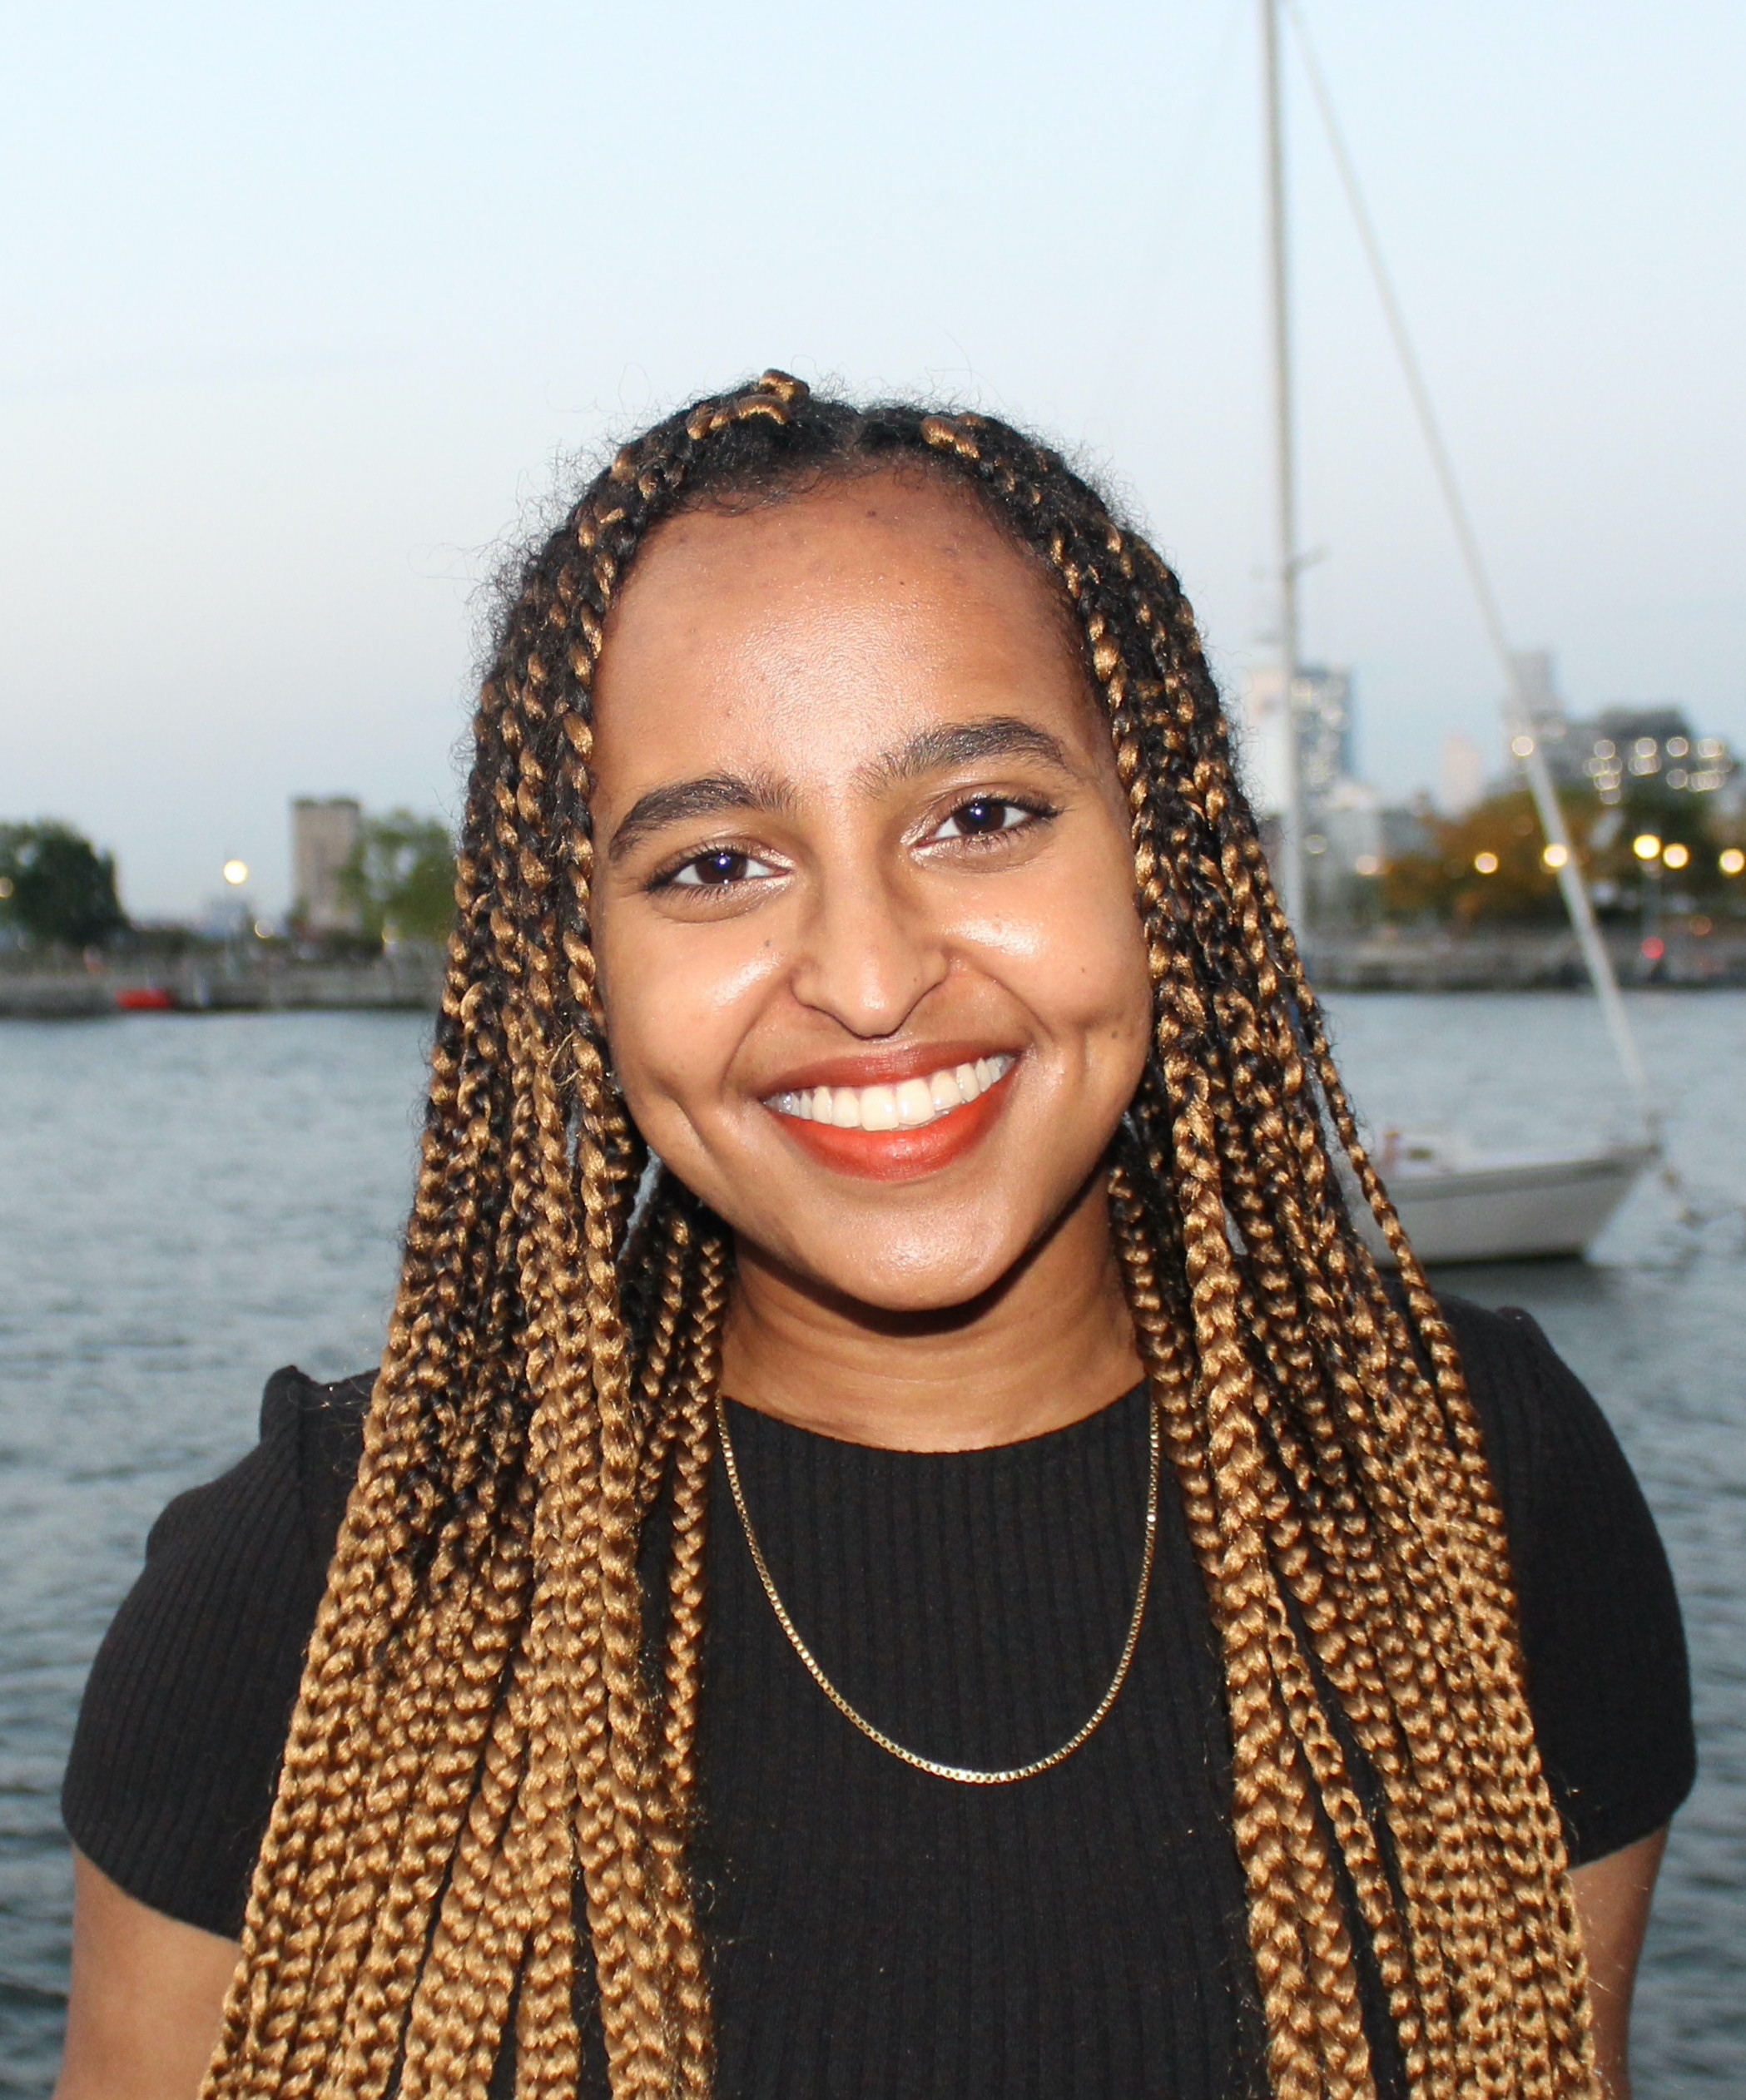 Hanna Gebremichael, an NYU student of color, in front of a lake with a sailboat.